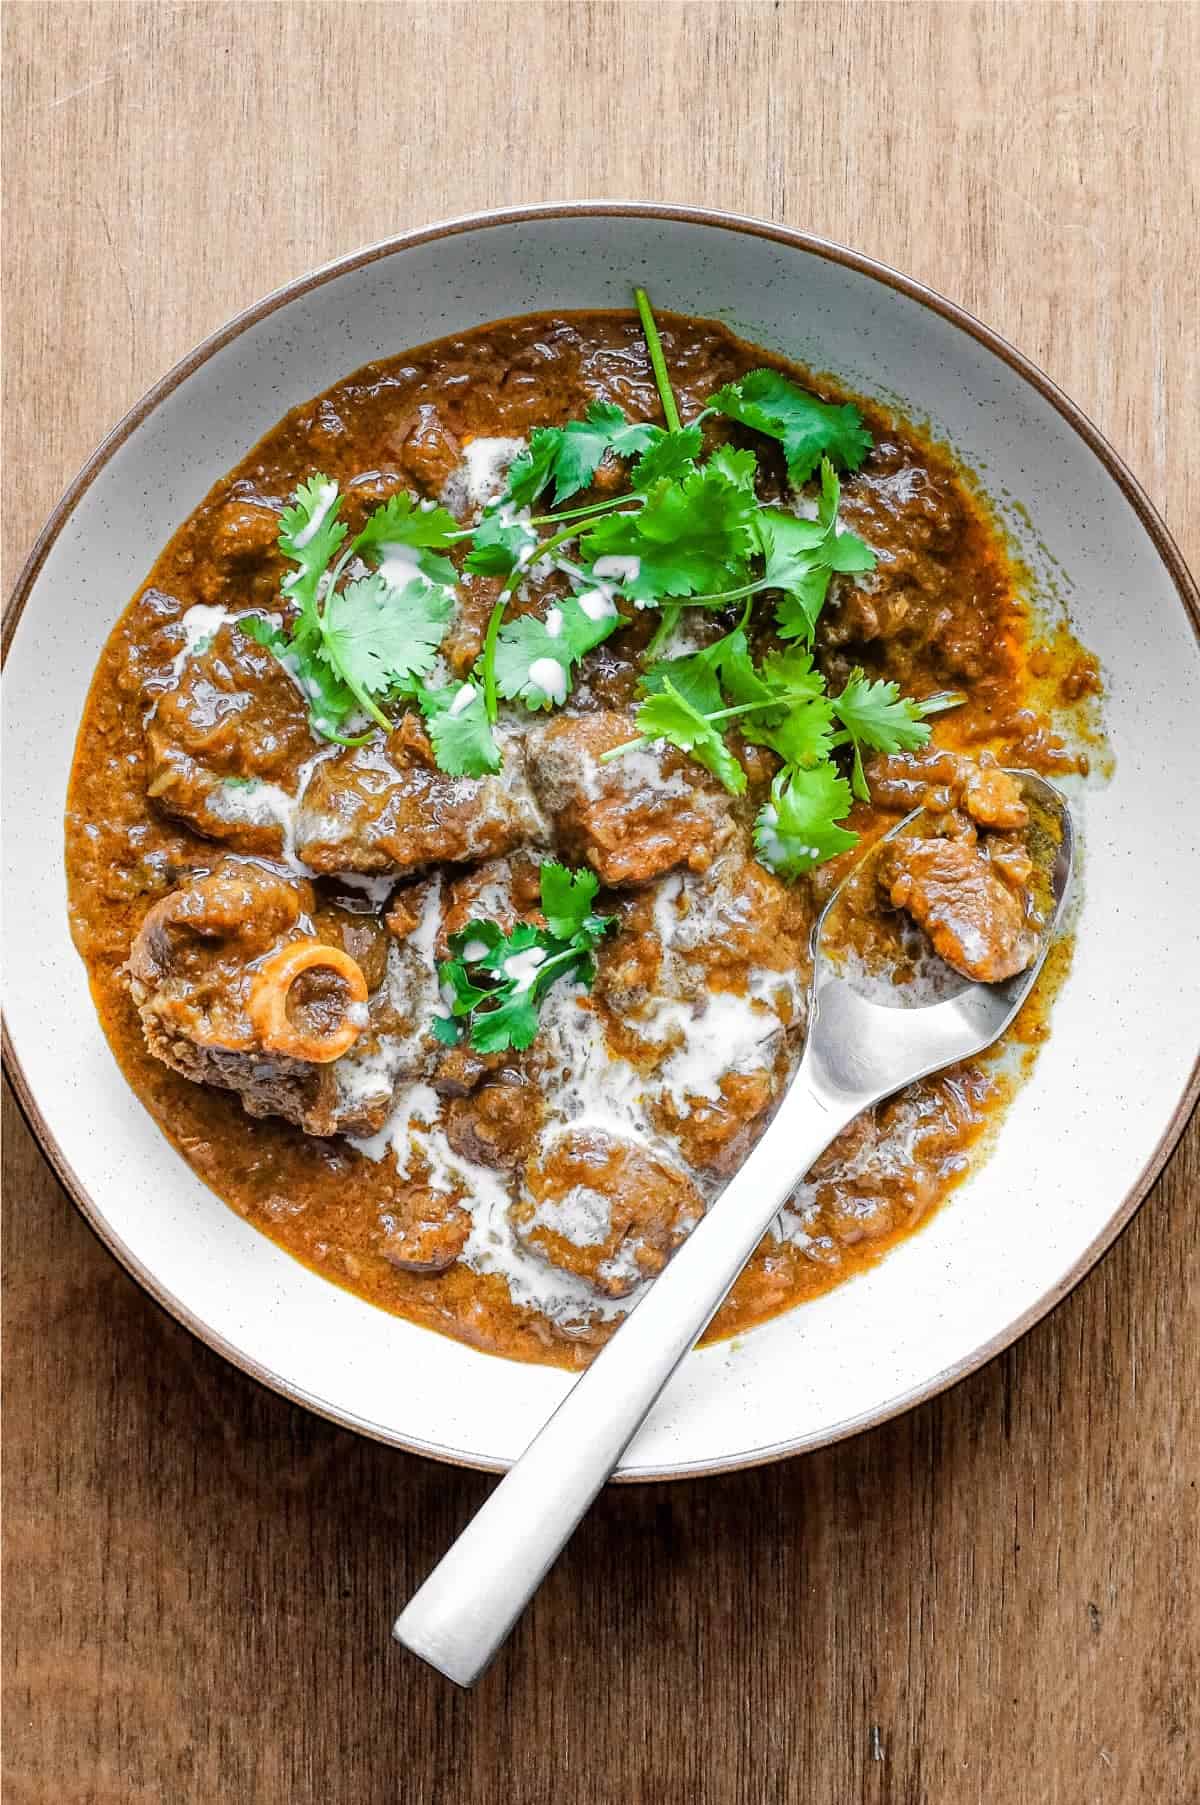 A bowl of lamb madras curry with a spoon on a wooden surface. The curry is garnished with cilantro and drizzled with coconut milk.